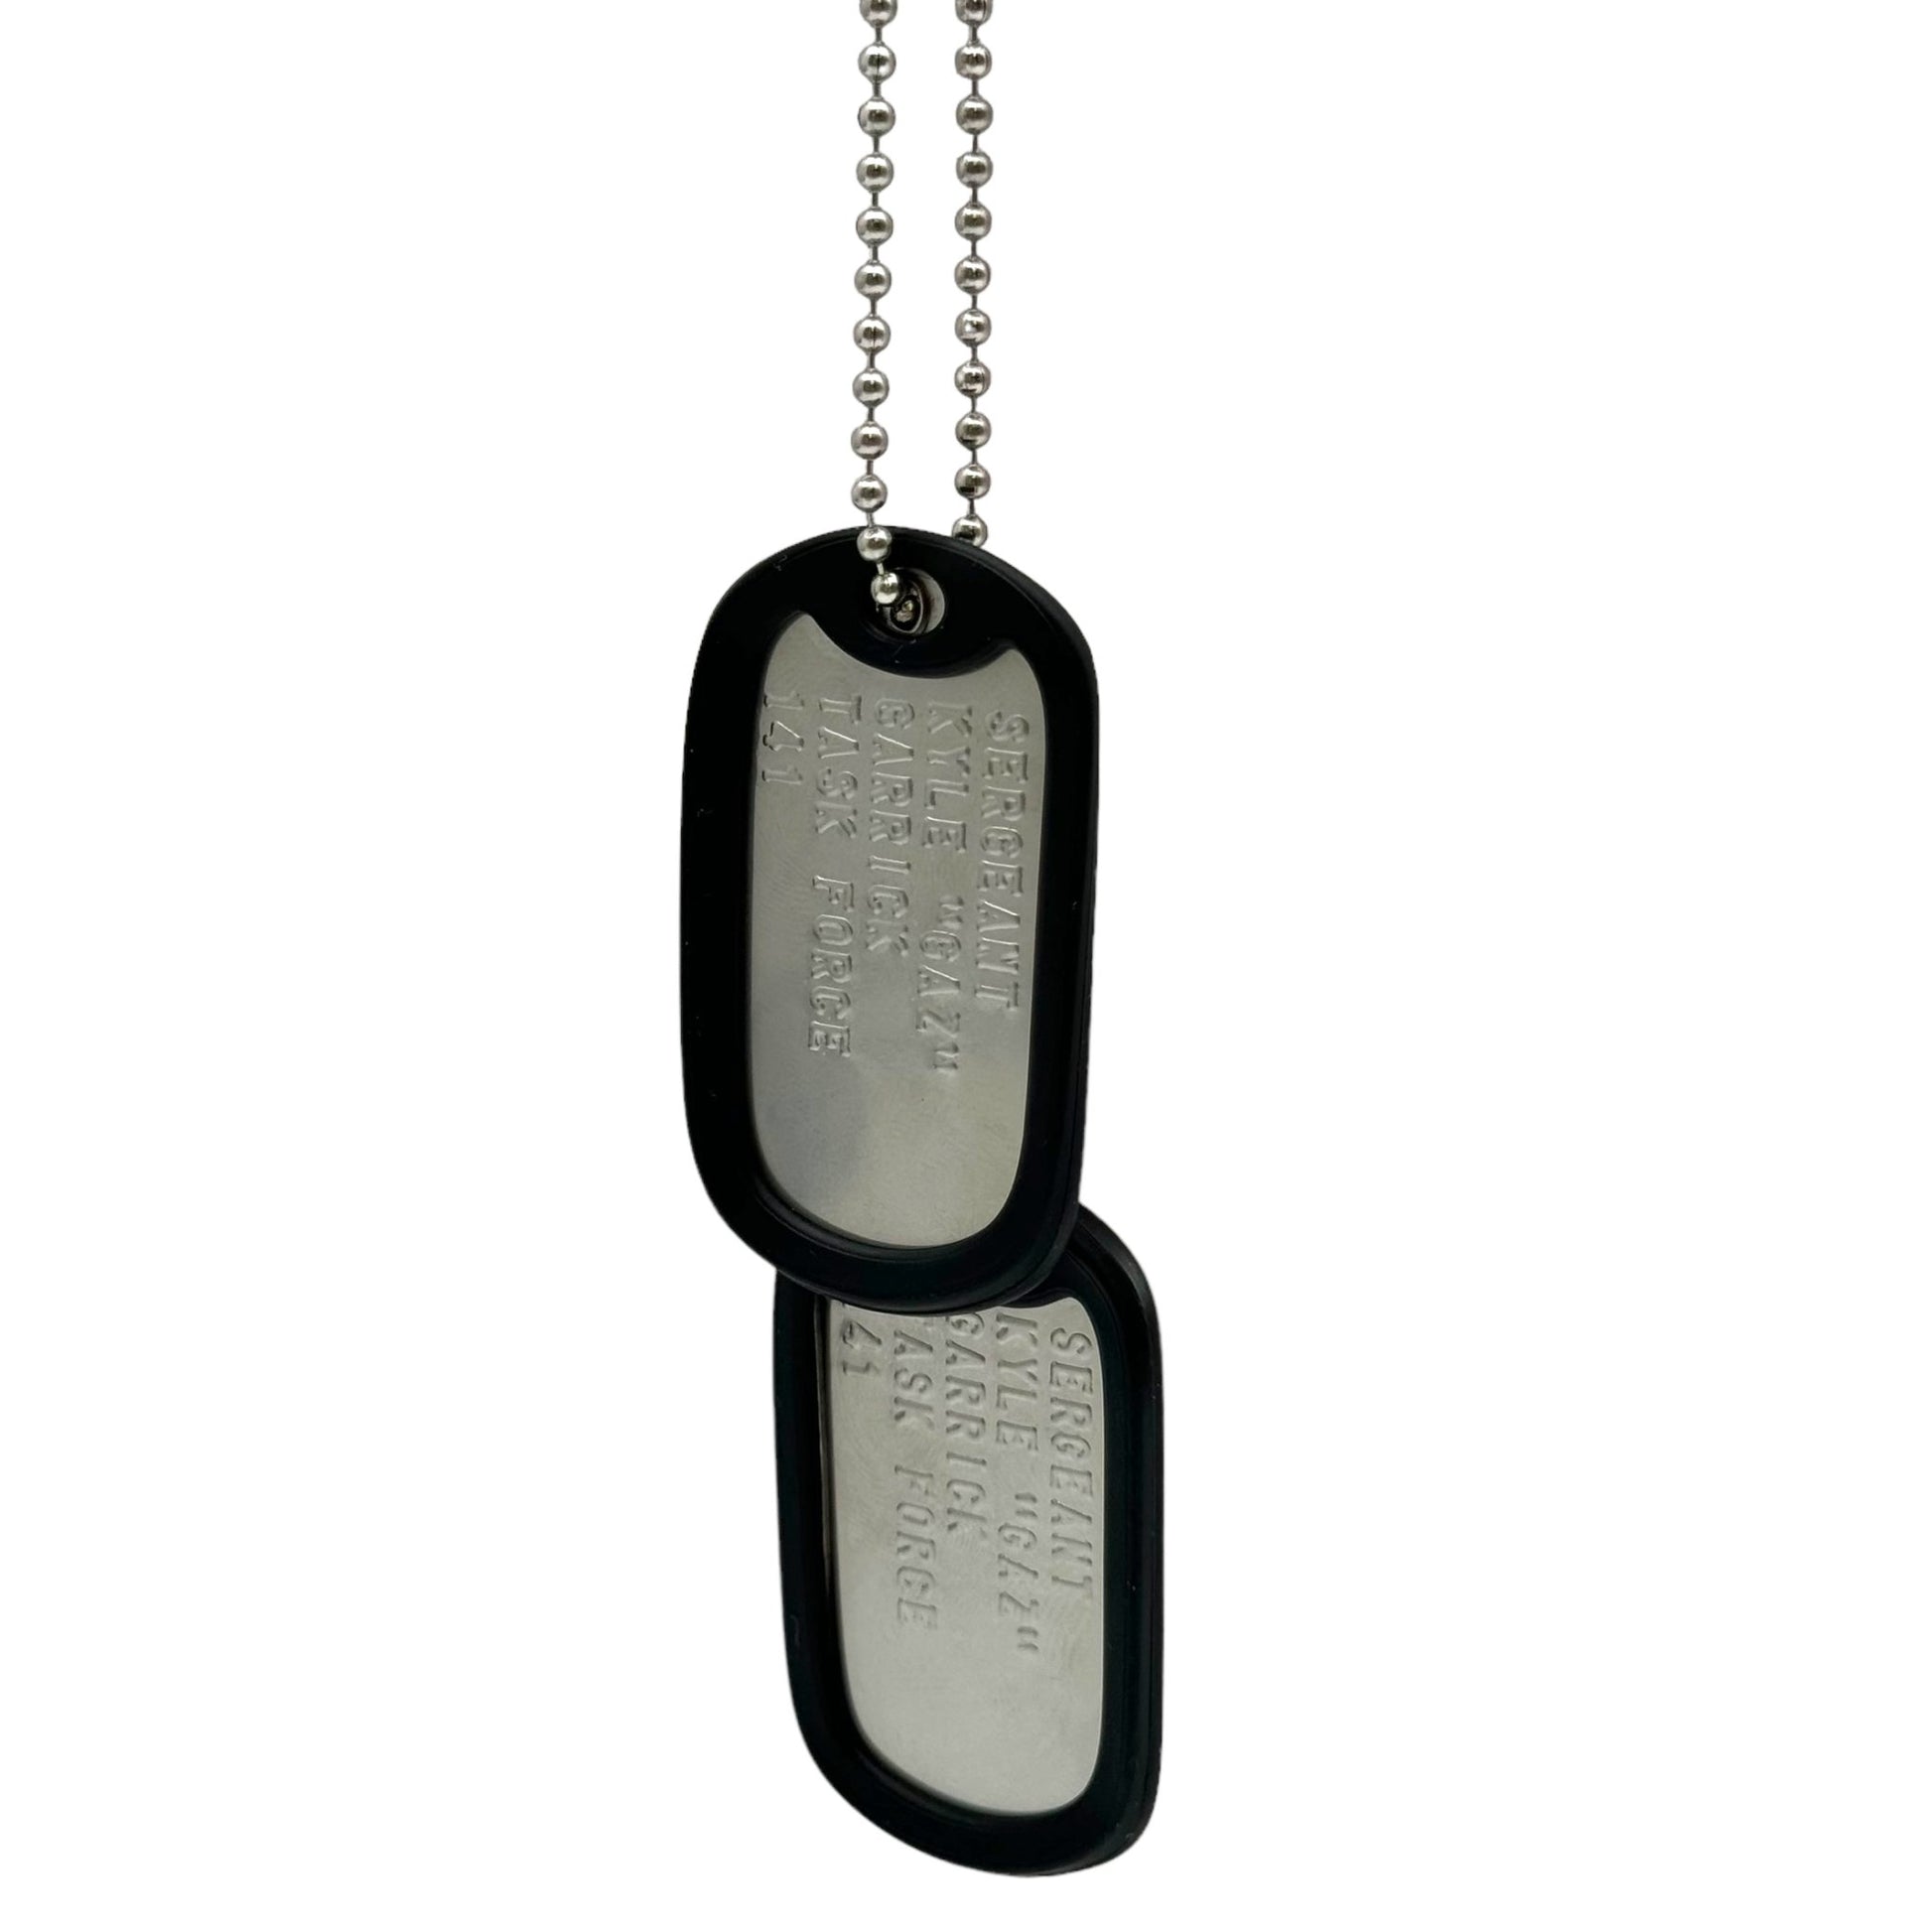 'KYLE GAZ GARRICK' Military Dog Tags - Cosplay Costume Prop Replica - Stainless Steel Chains Included - TheDogTagCo